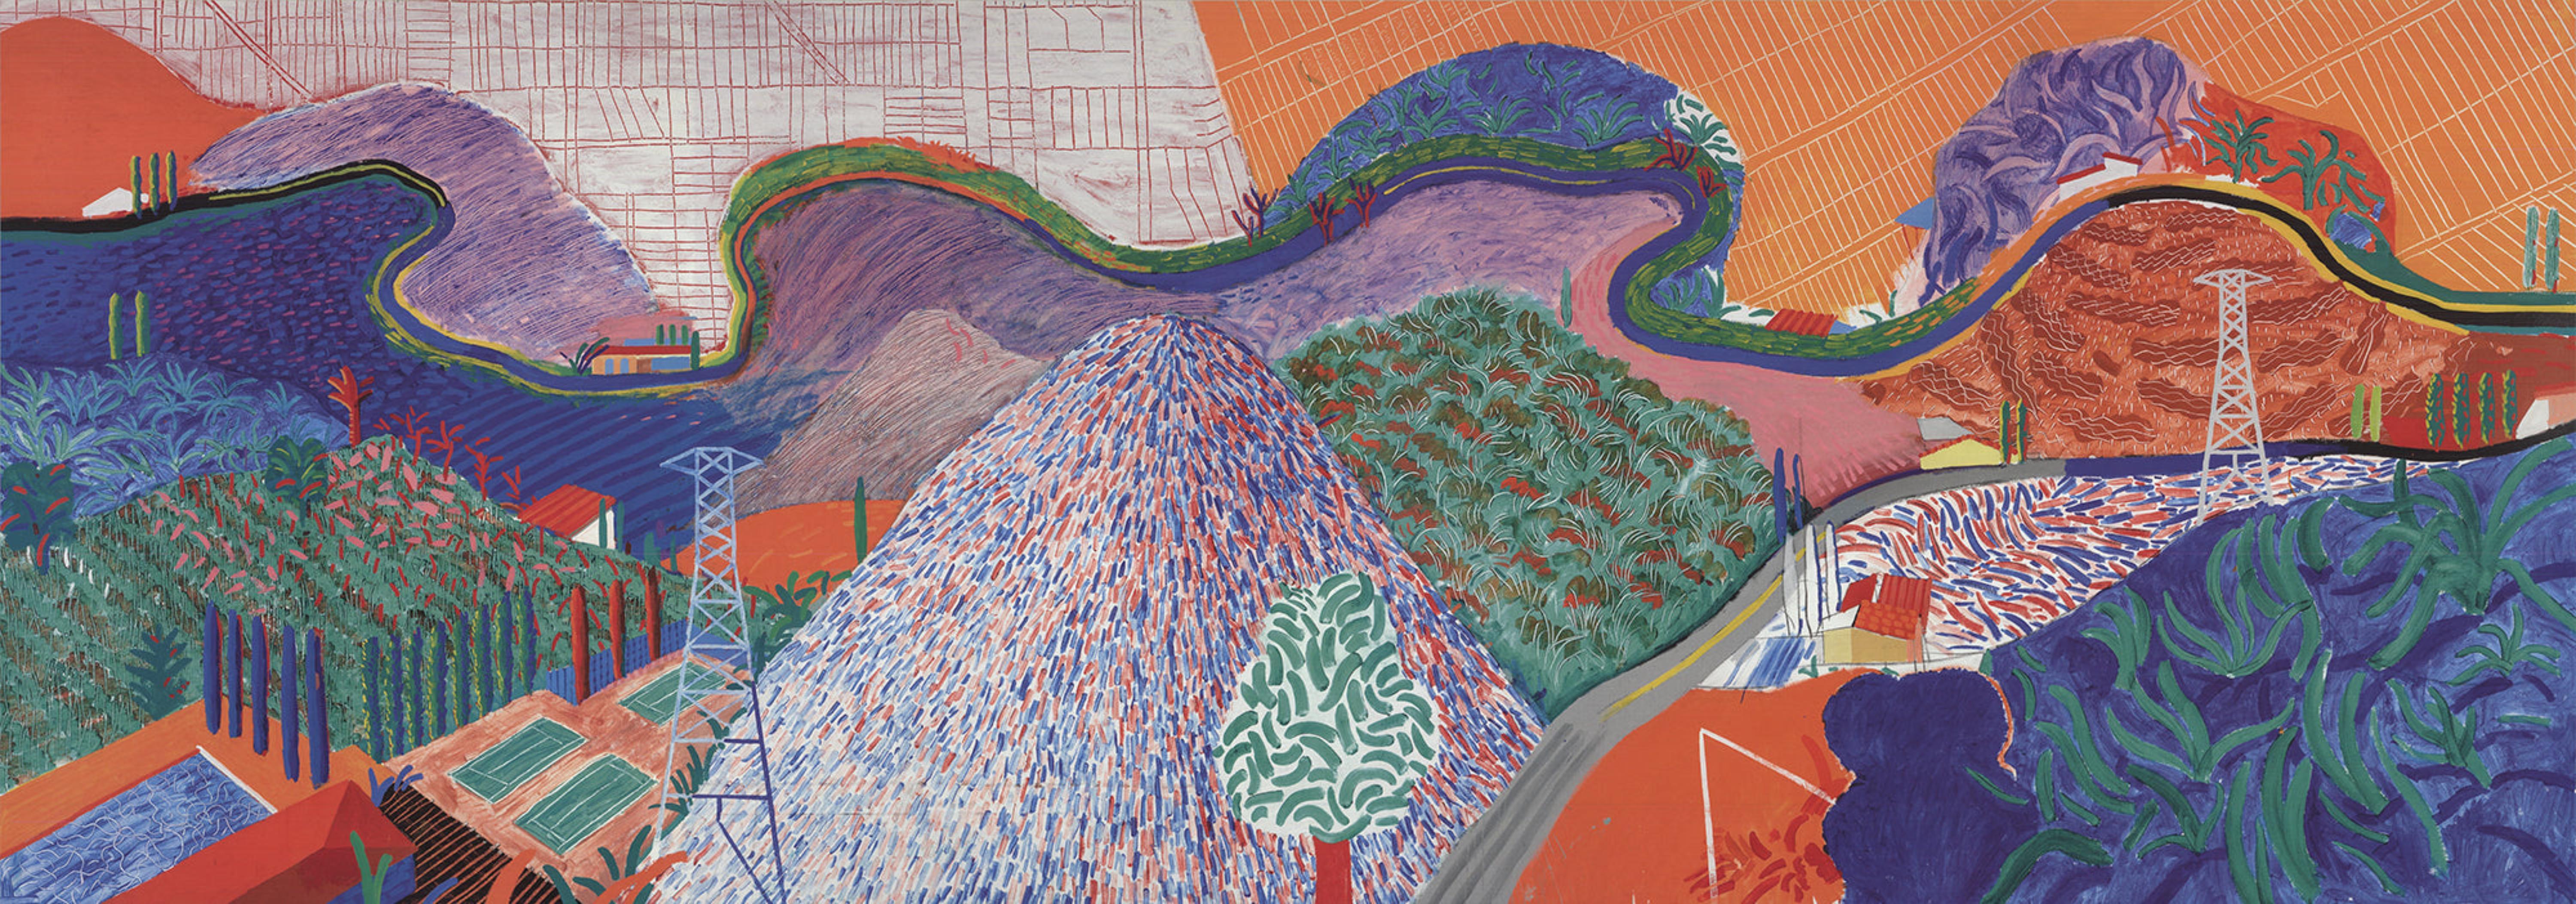 David Hockney „Mulholland Drive: The Road to the Studio“ 2021- Offset-Lithographie im Angebot 3